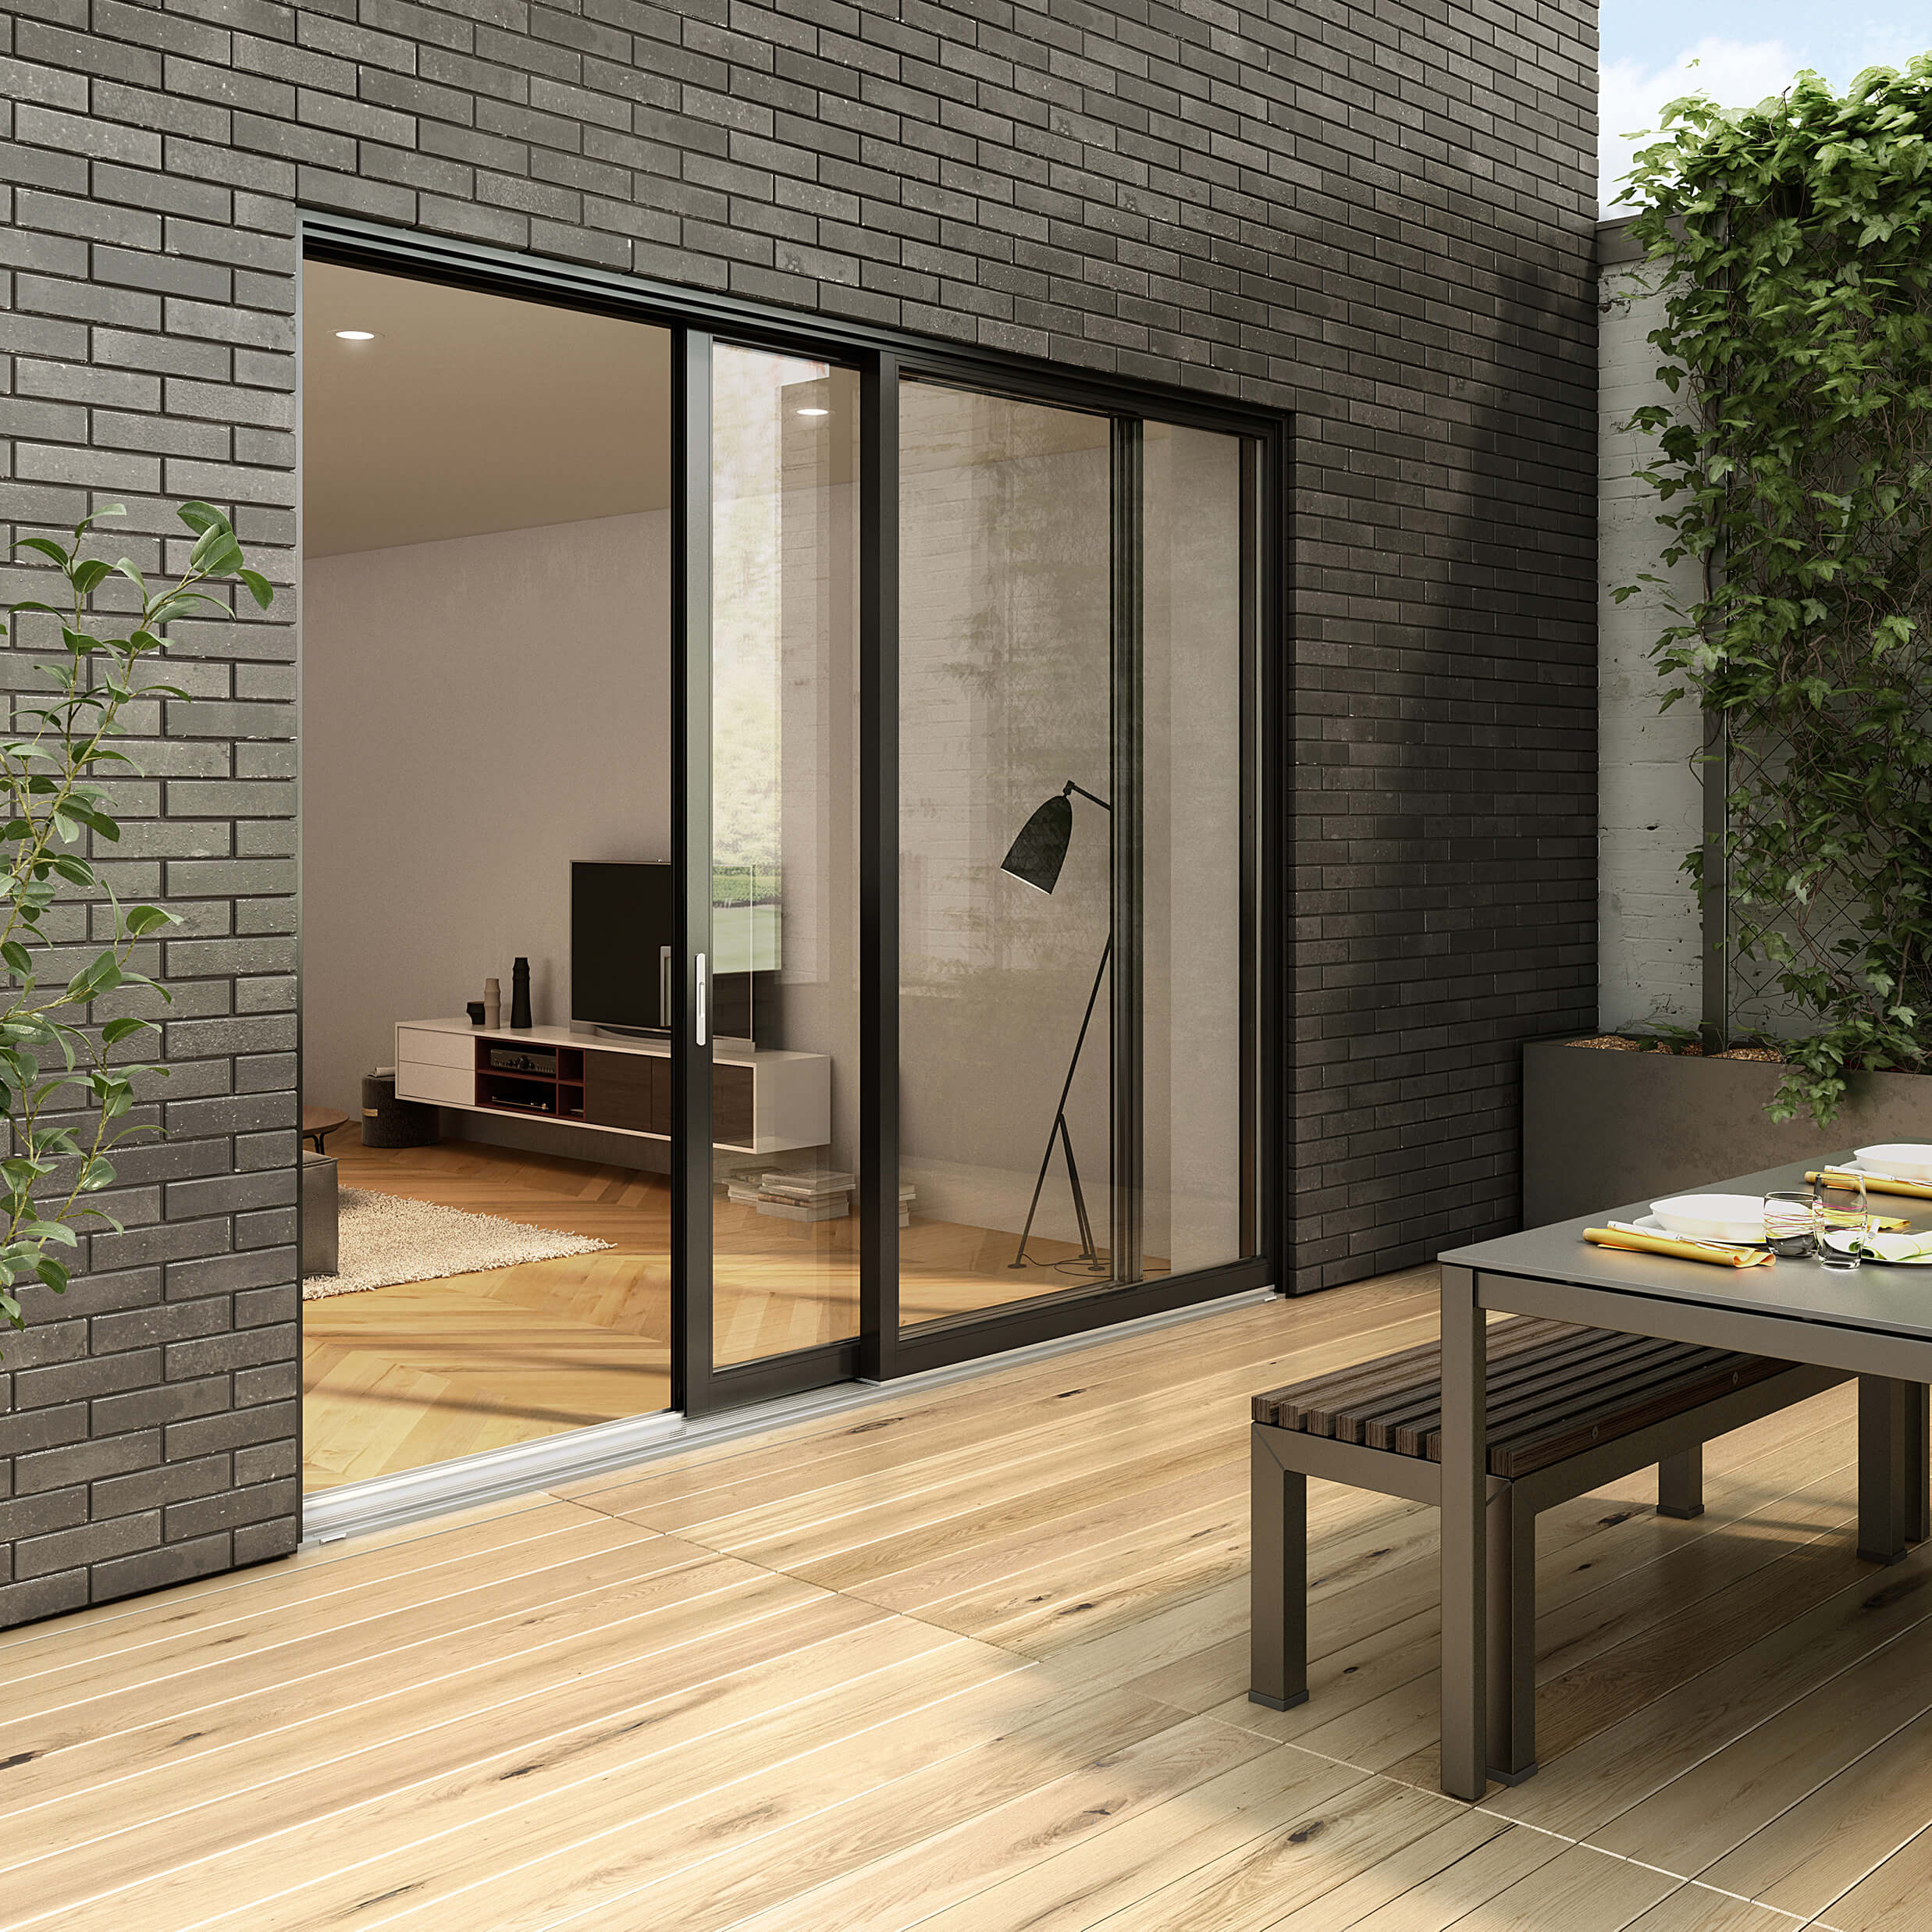 This beautiful black patio door is lift and slide for easy opening and helps connect indoor and outdoor spaces.